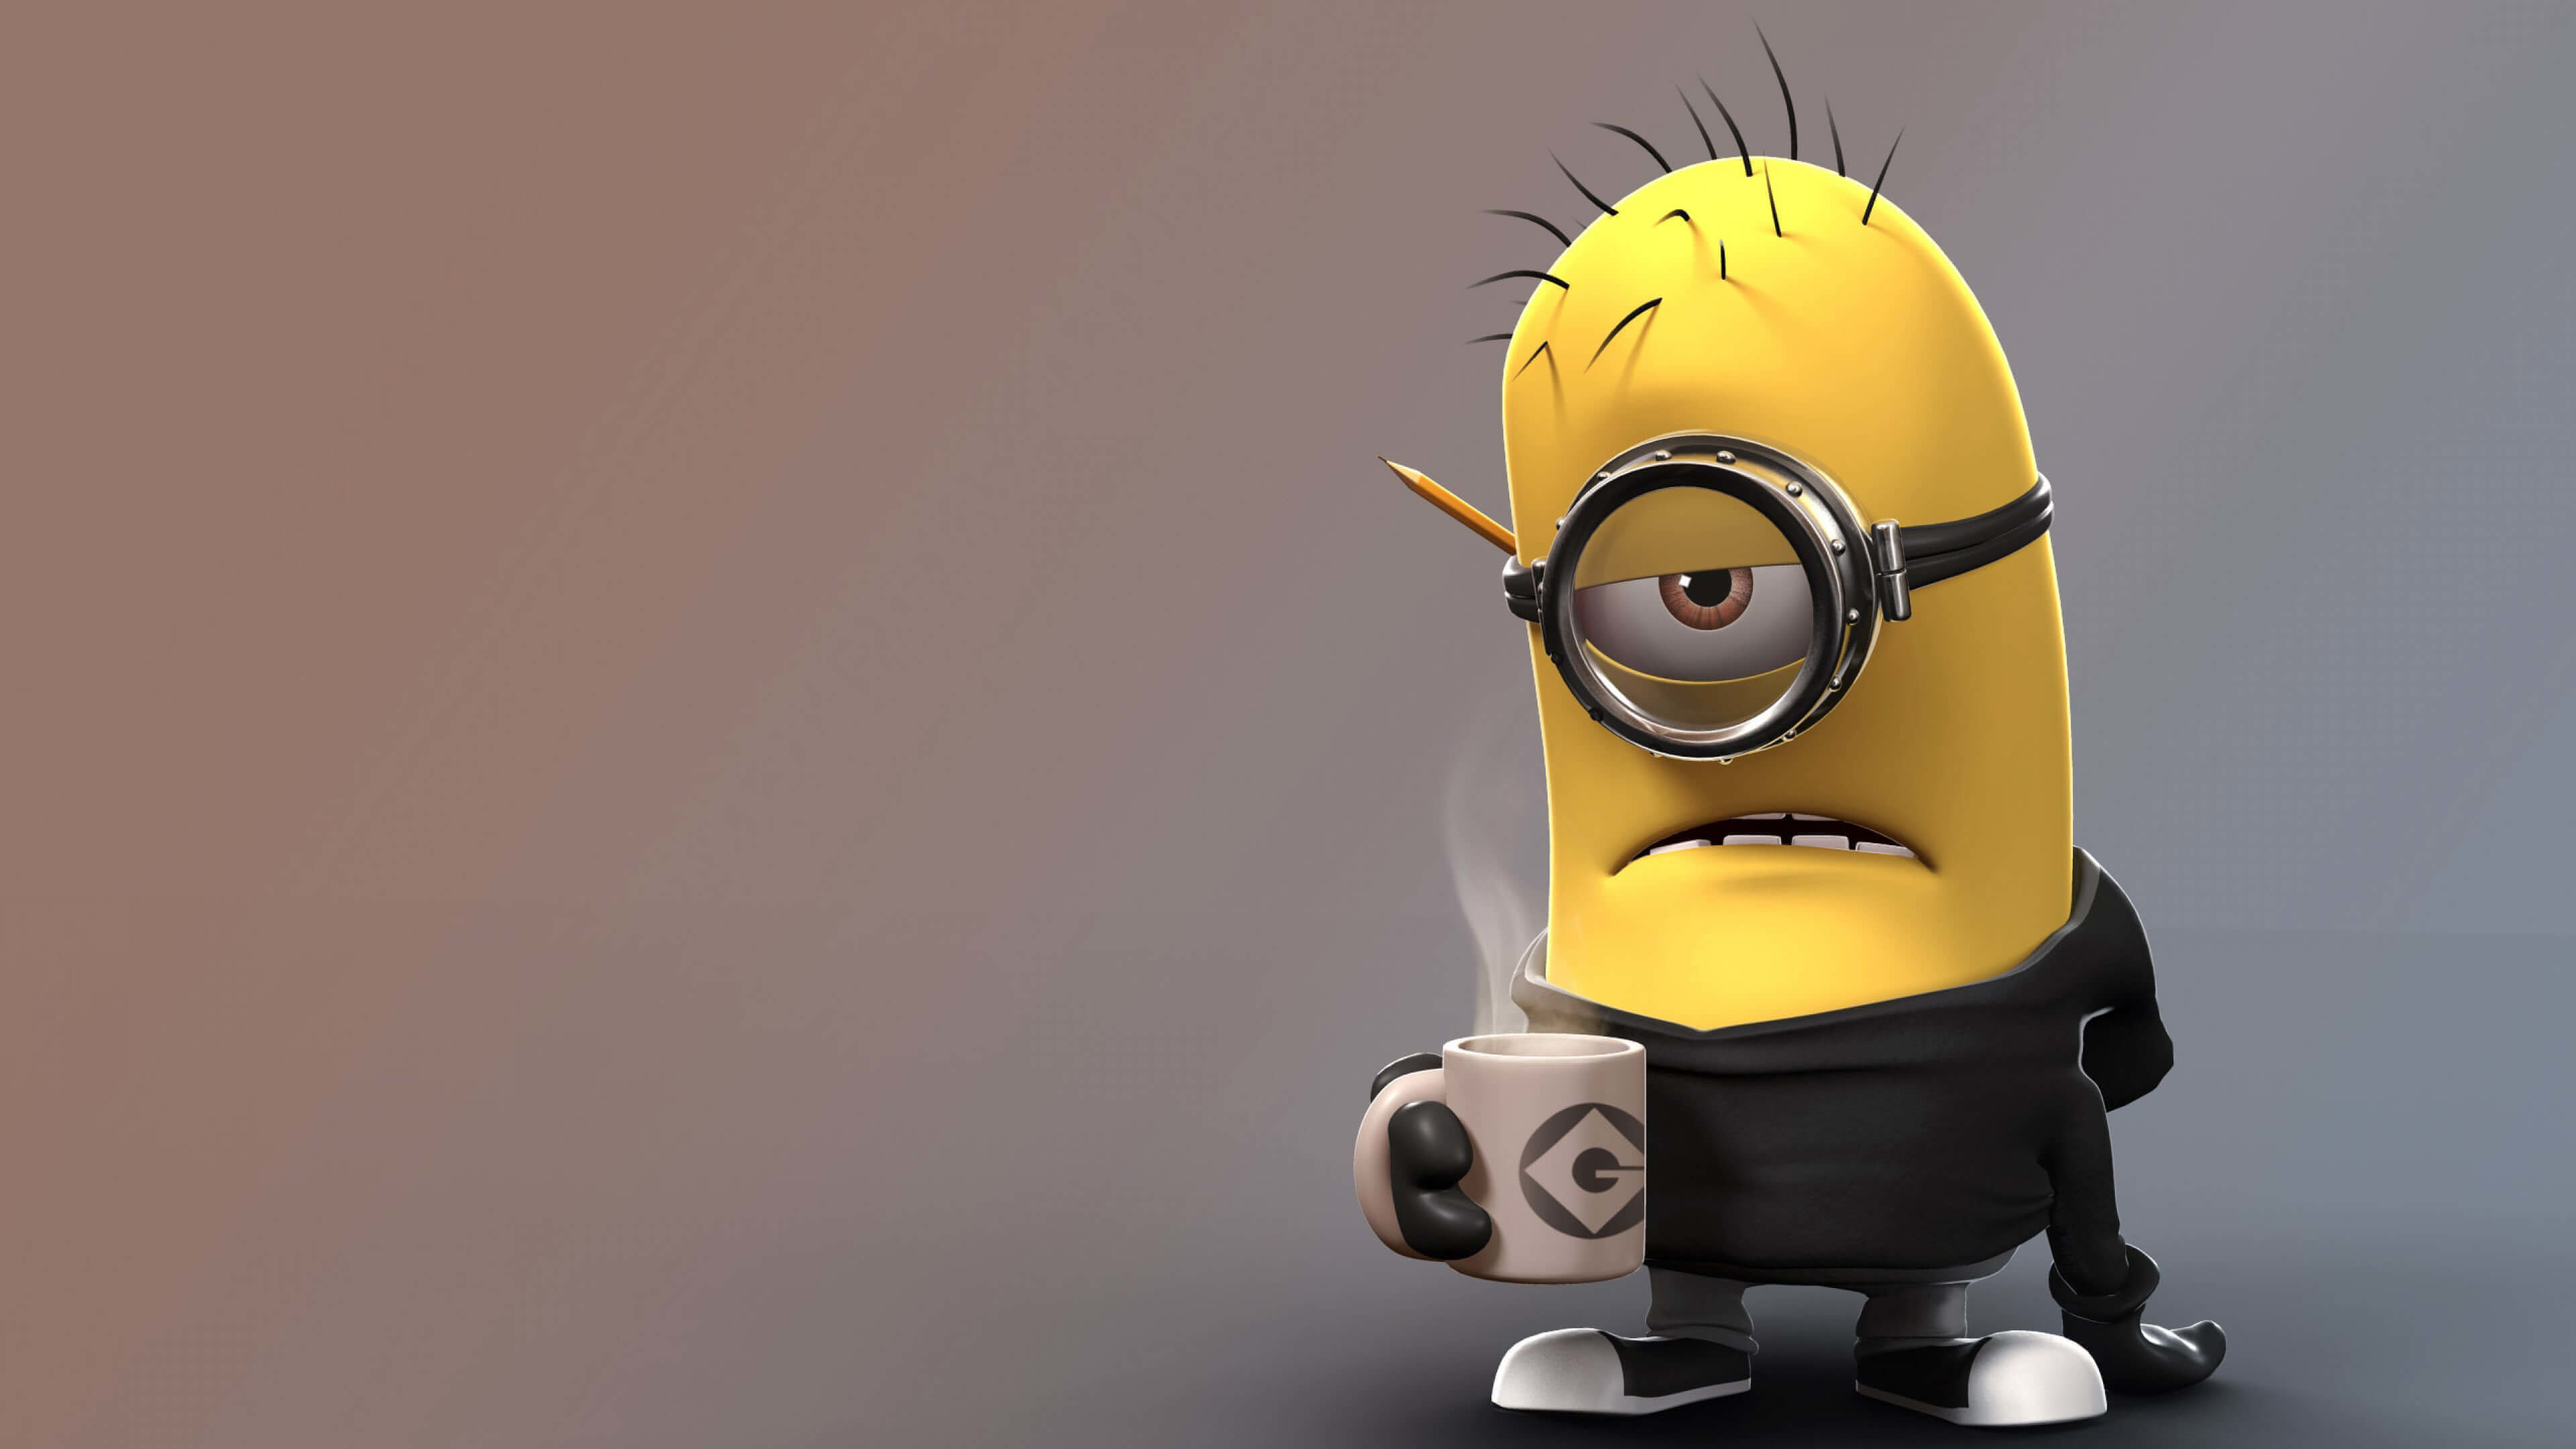 3840x2160 Despicable Me Angry Minion Â· Despicable Me Angry Minion Wallpaper